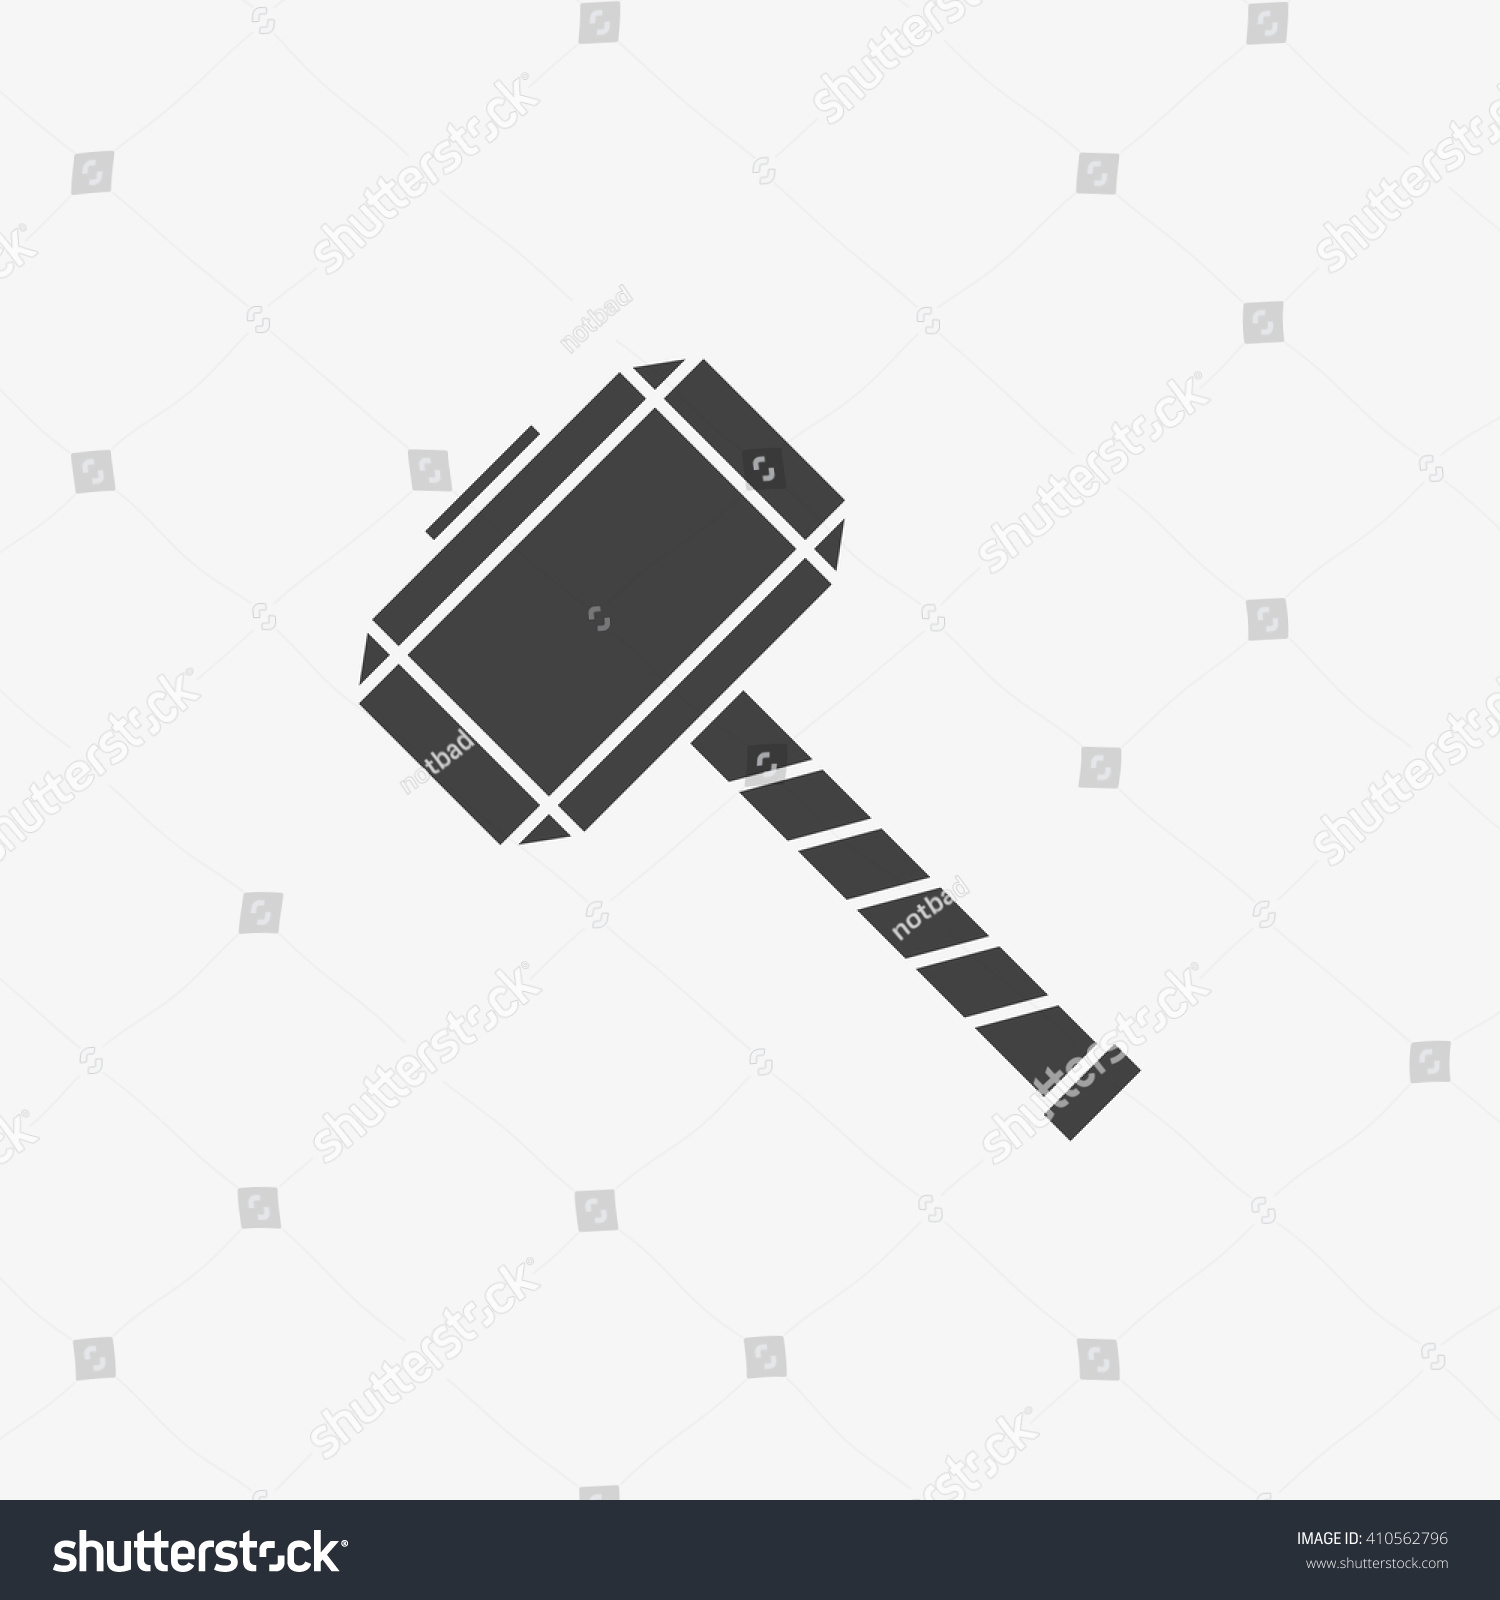 SVG of Thor Hammer Icon in trendy flat style isolated on grey background, for your web site design, app, logo, UI. Vector illustration, EPS10. svg